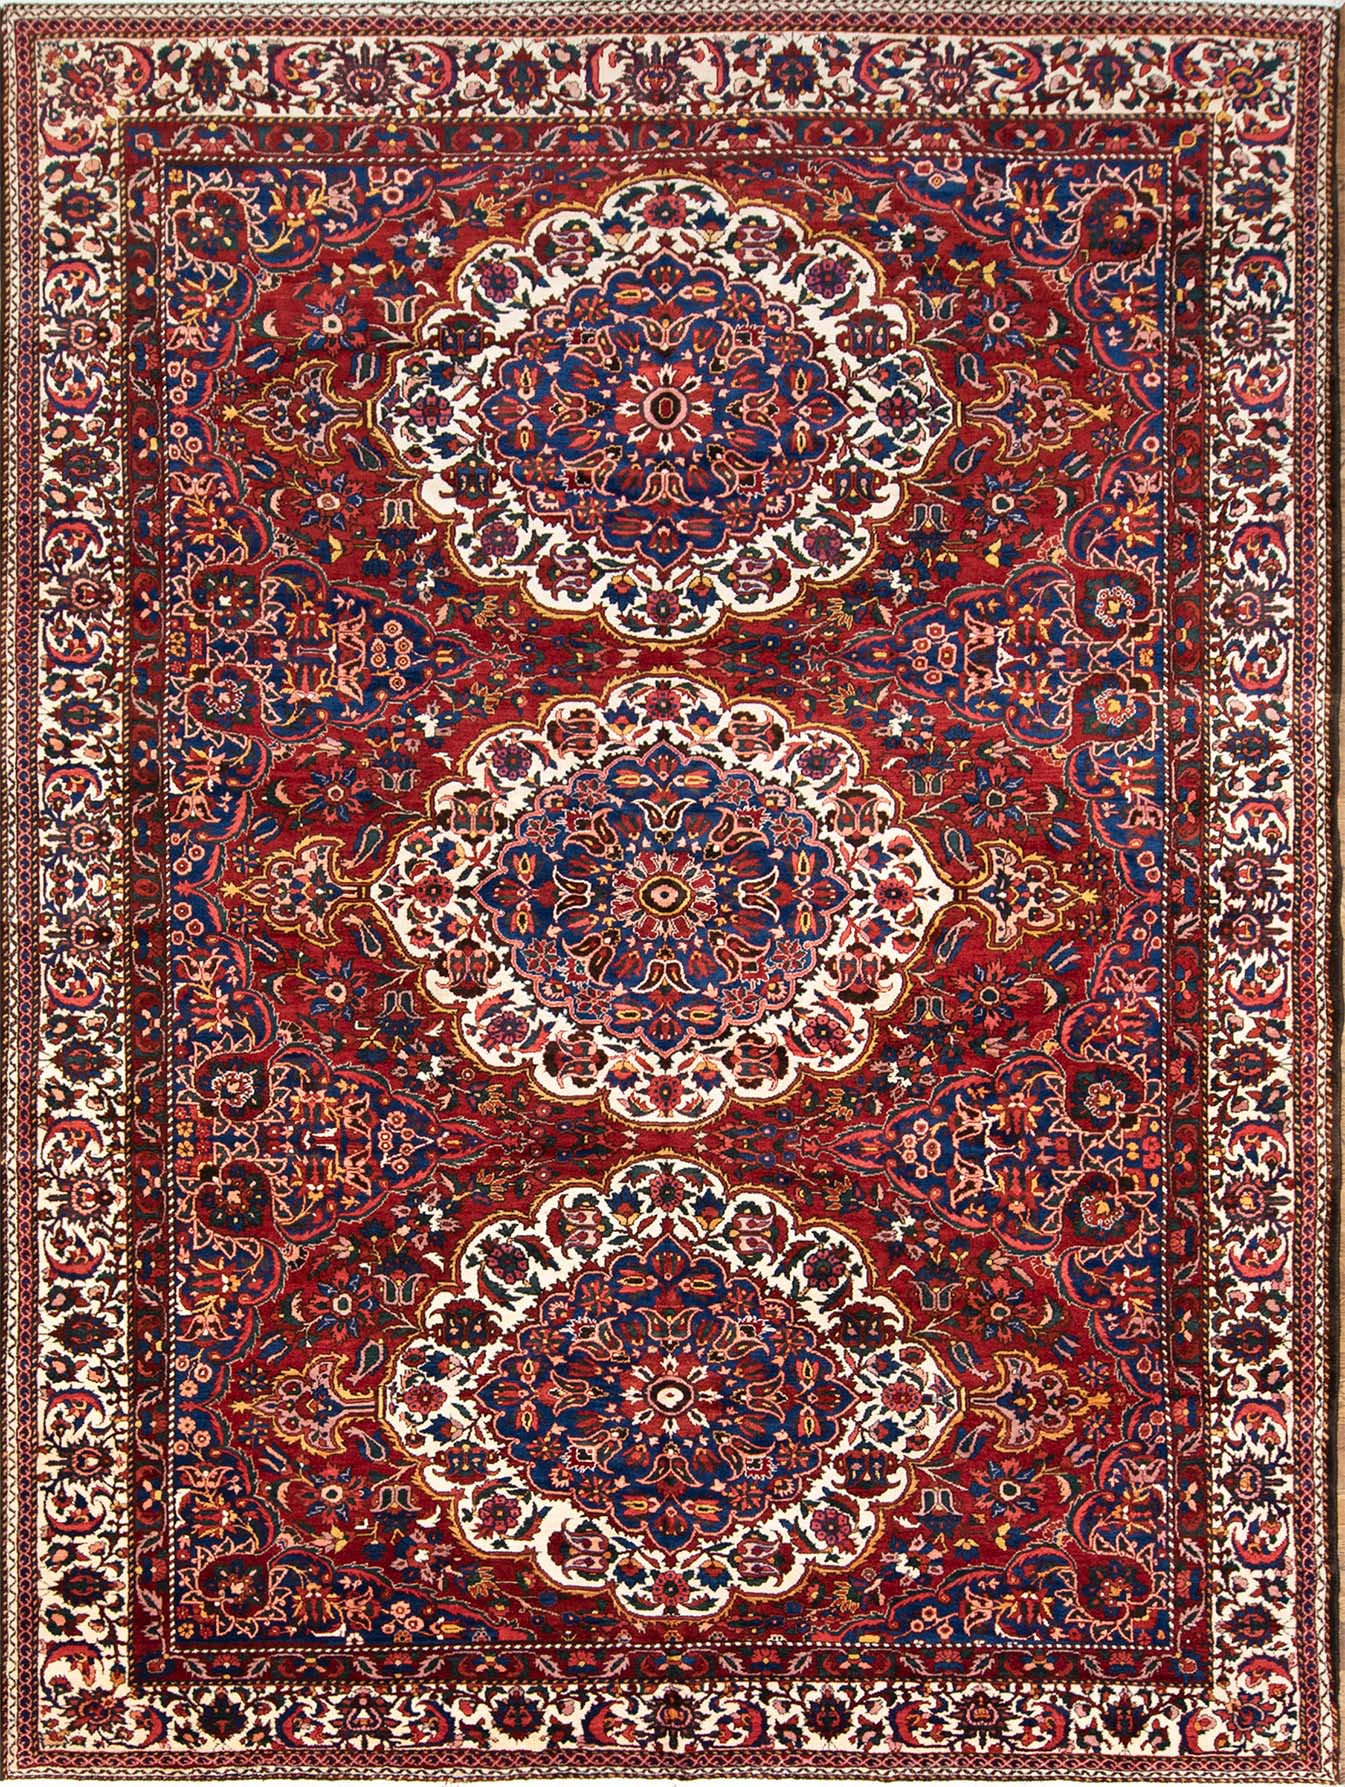 High quality and beautiful hand knotted antique Persian Bakhtiari rug with three medallions in red color. Size 10.7x14.